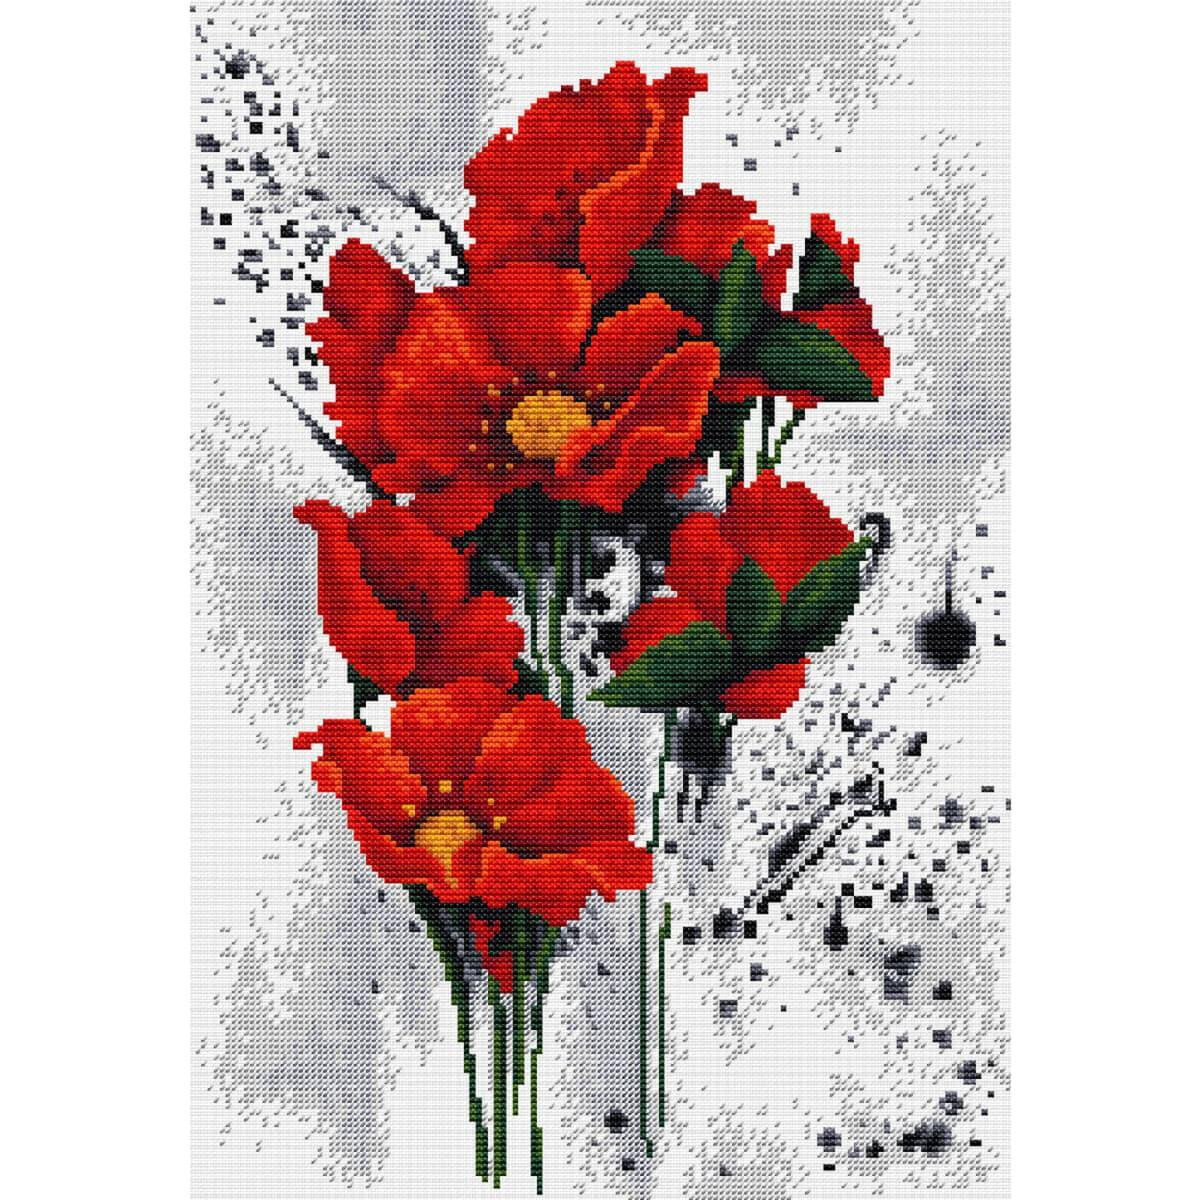 An abstract digital image features bright red poppies...